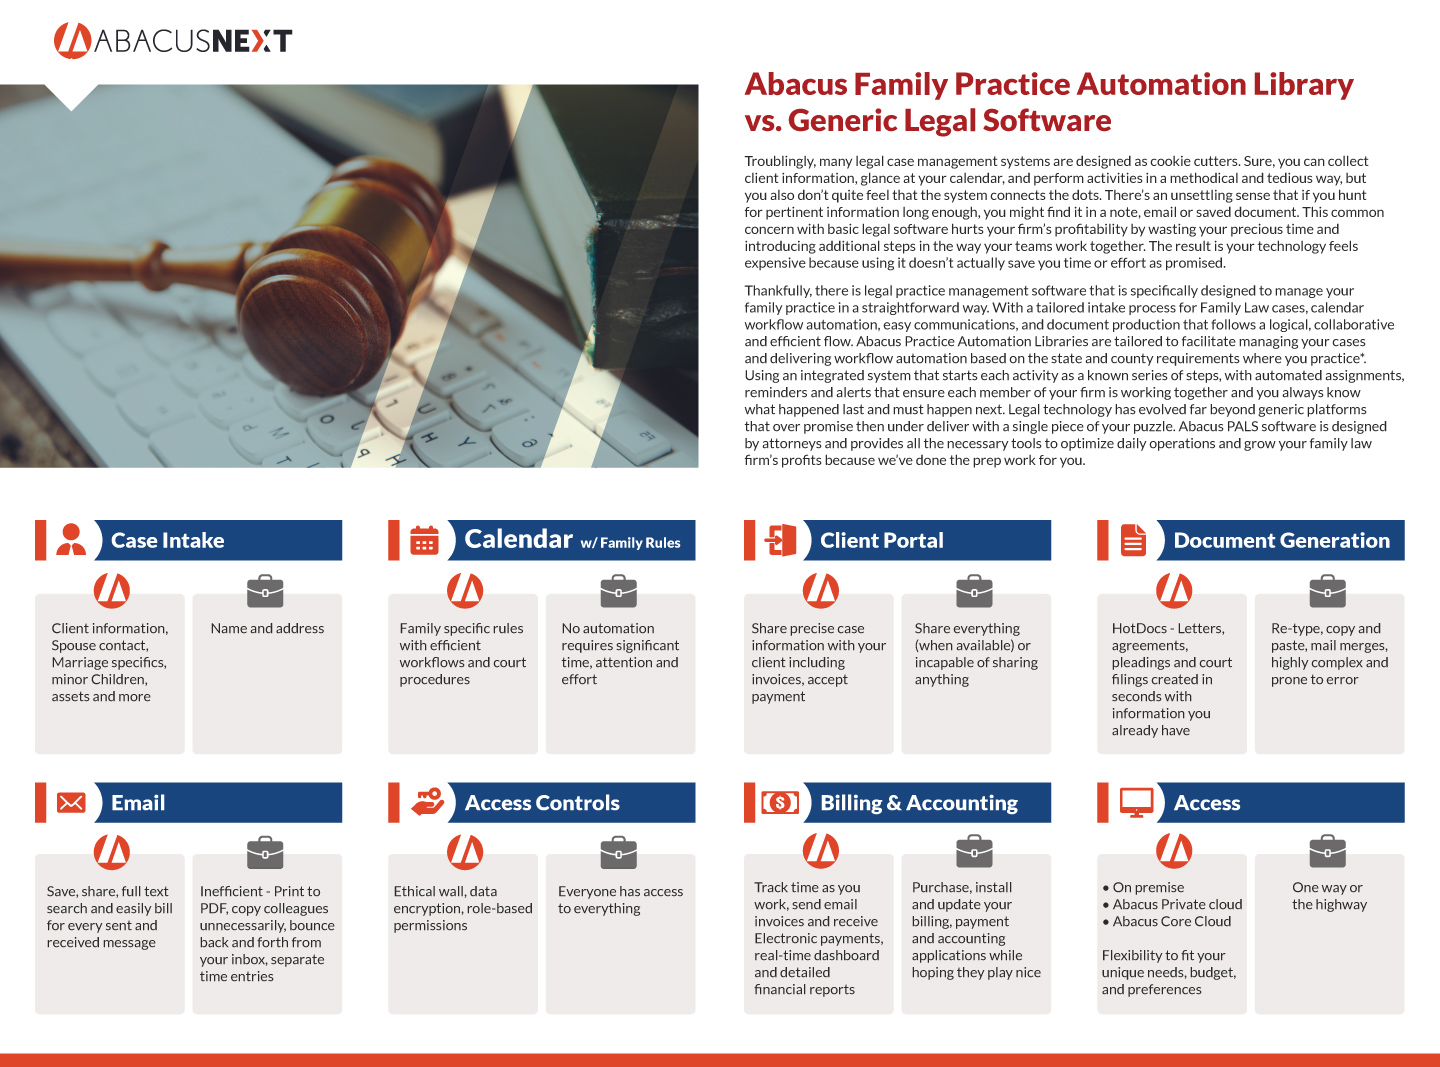 Family law software one-sheet showing features